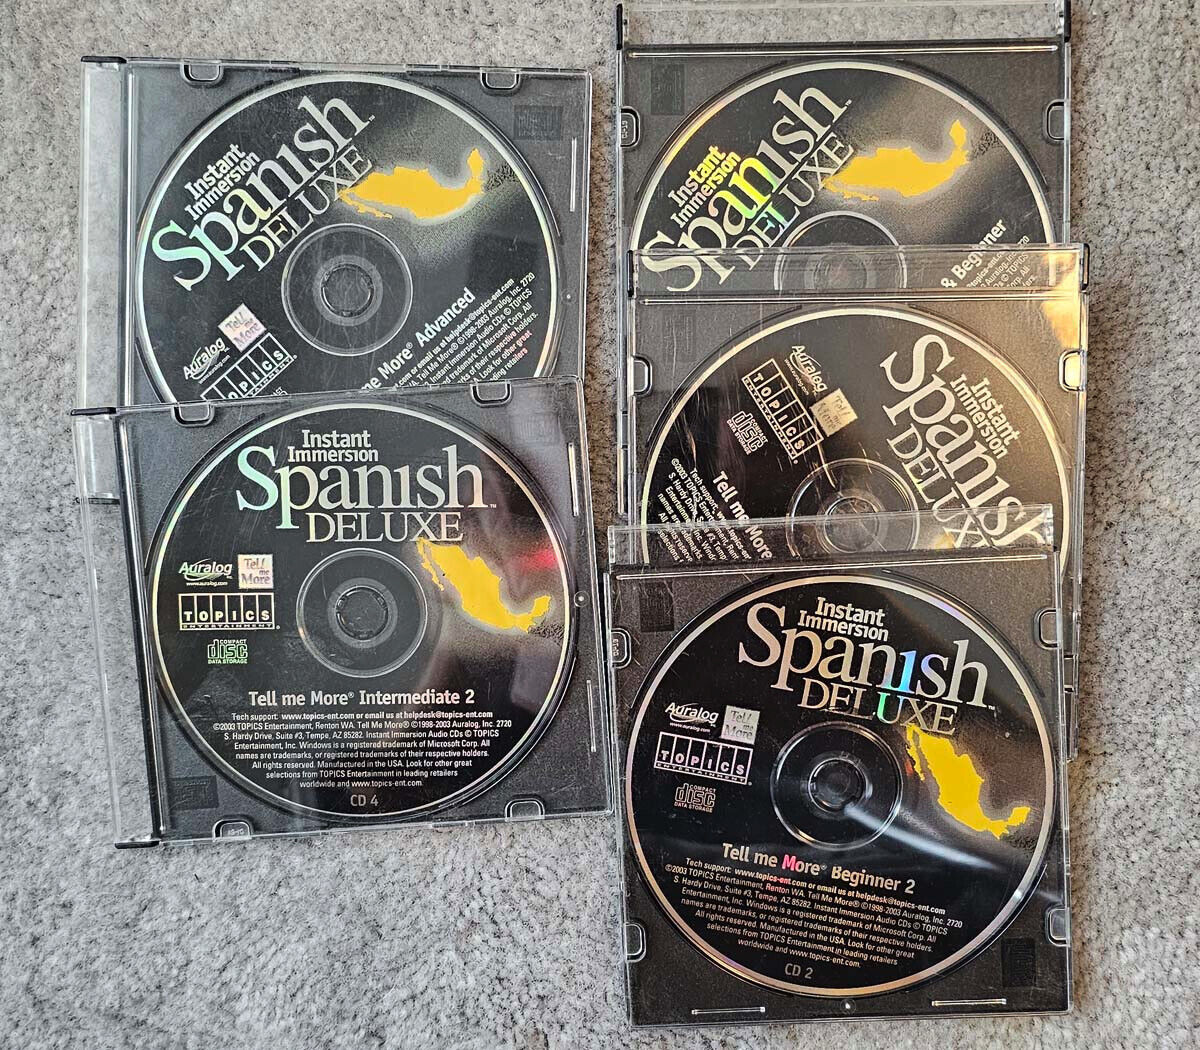 Instant Immersion Spanish Deluxe 5 PC CD-ROMs. Never used, in CD holders.